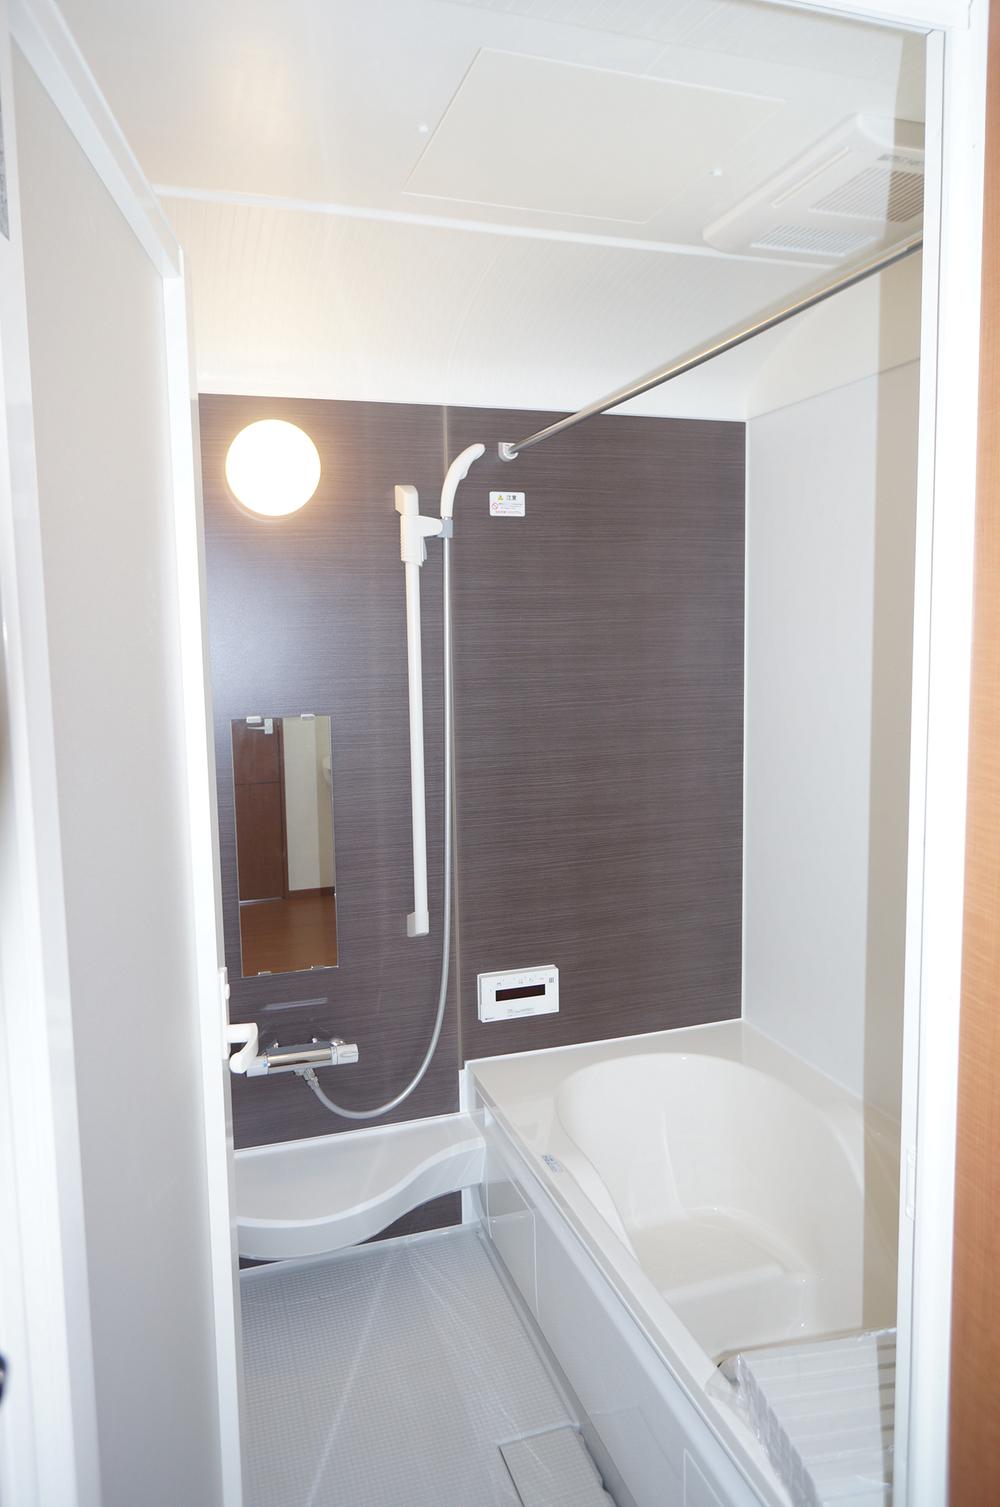 Same specifications photo (bathroom). It is the example of construction of the same construction company.  It is different from the actual photo. 